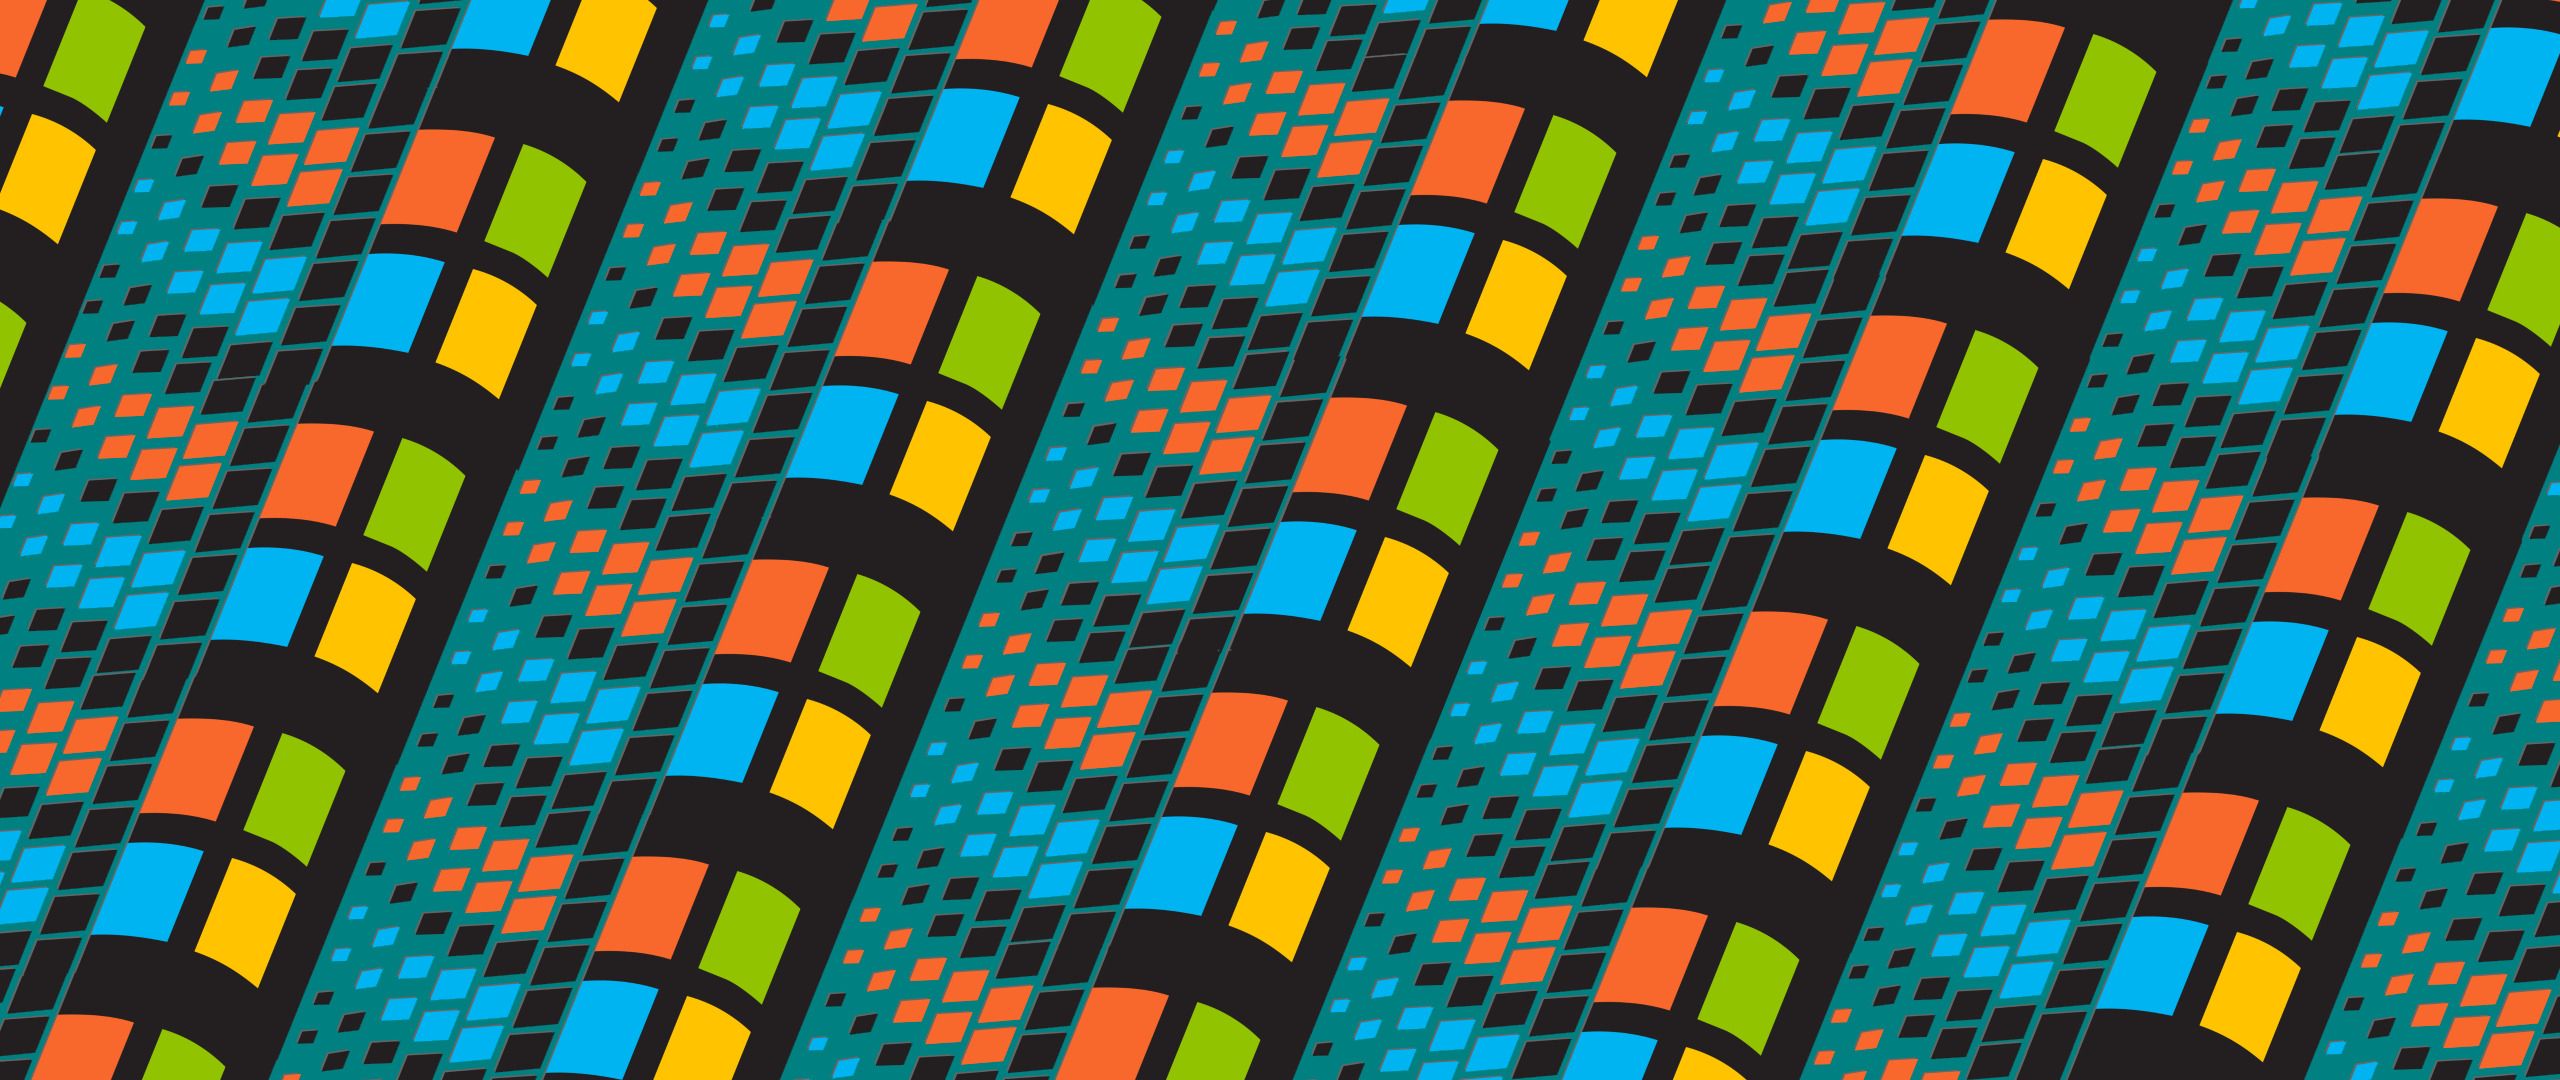 This windows 95' aesthetic wallpaper i spent too long making [2560x1600]